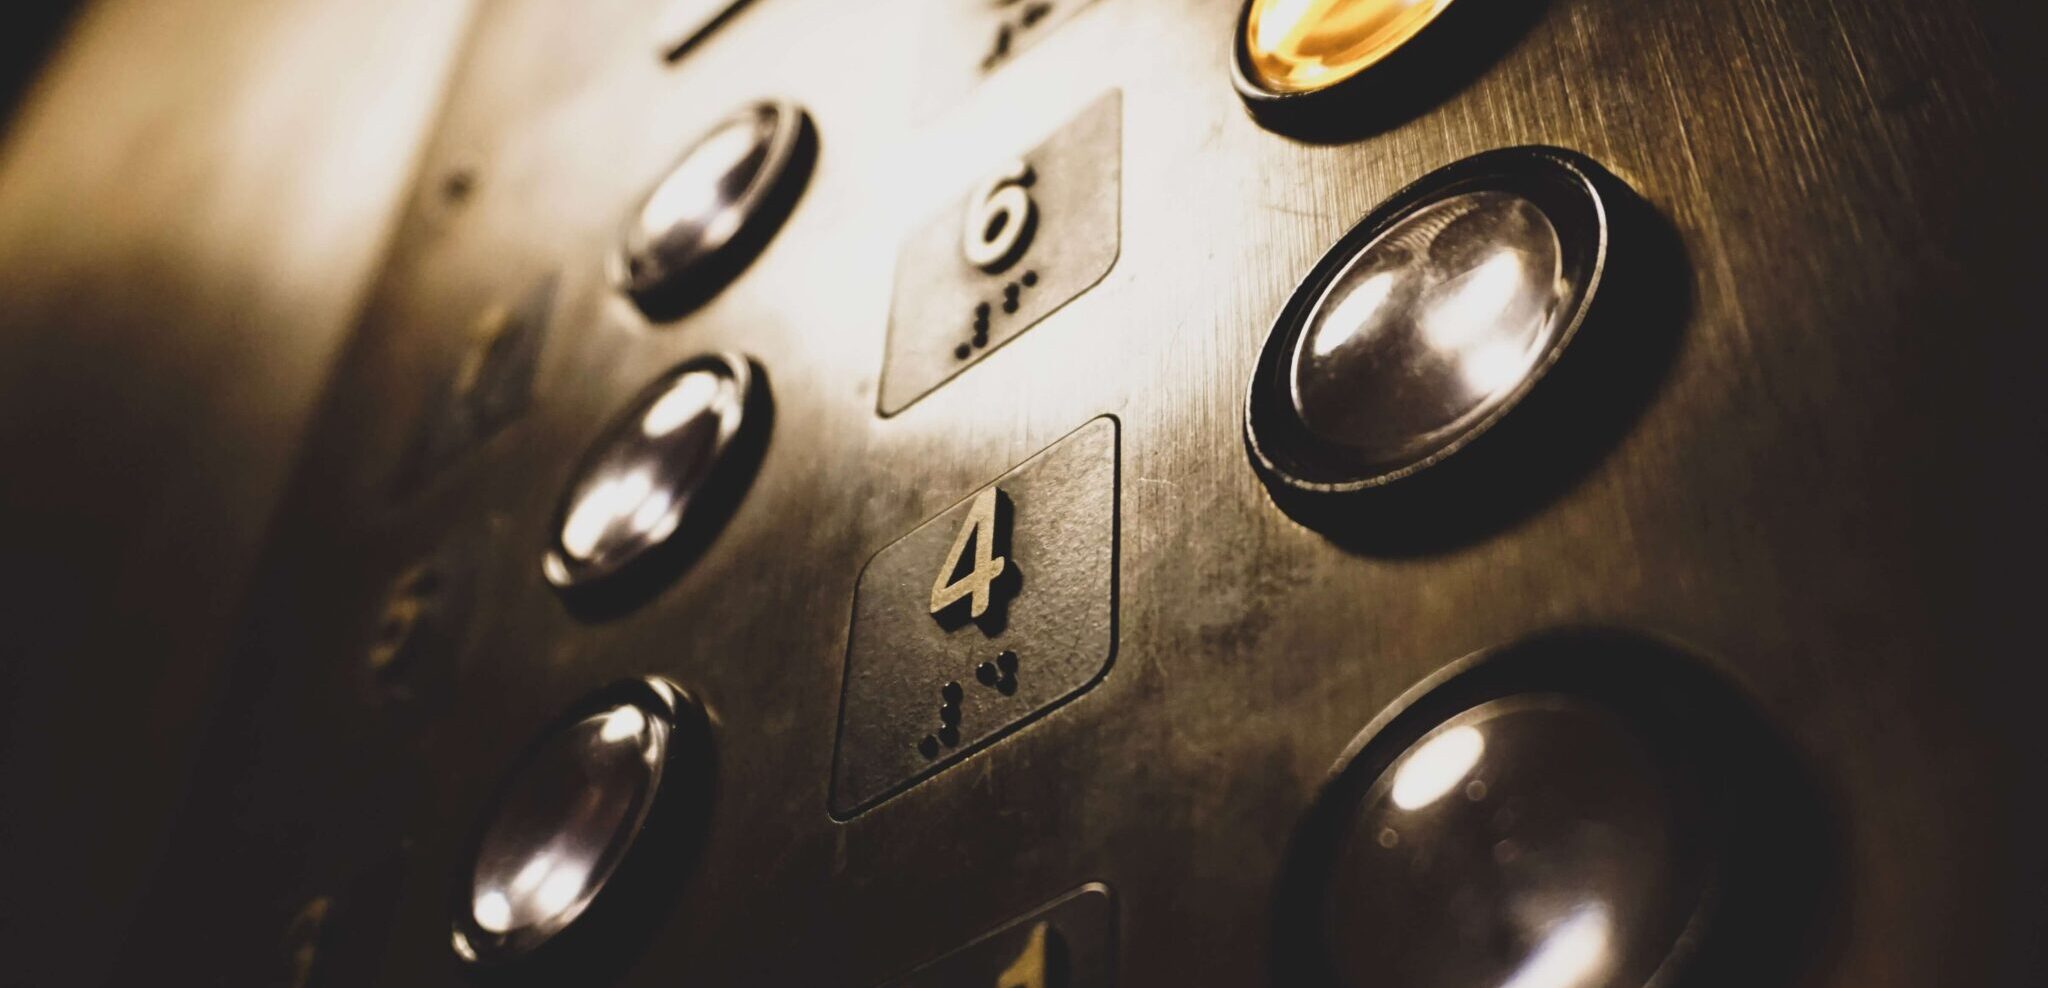 An elevator button with the fourth floor.